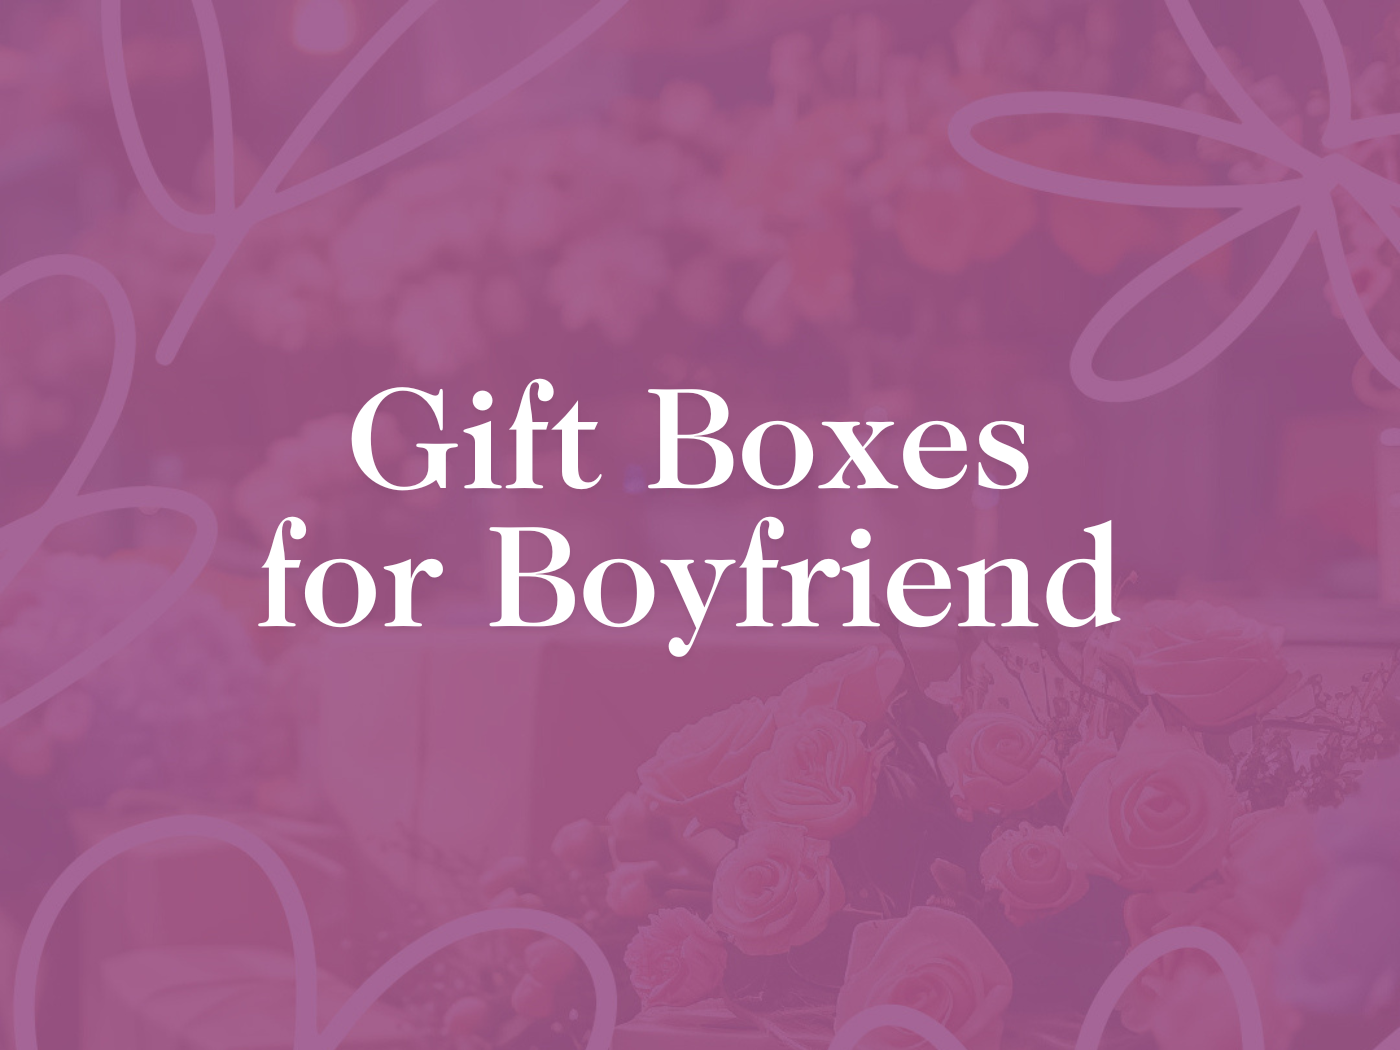 An image overlaid with purple, featuring the text 'Gift Boxes for Boyfriend' in white lettering. Fabulous Flowers and Gifts. Gift Boxes for Boyfriend. Delivered with Heart.